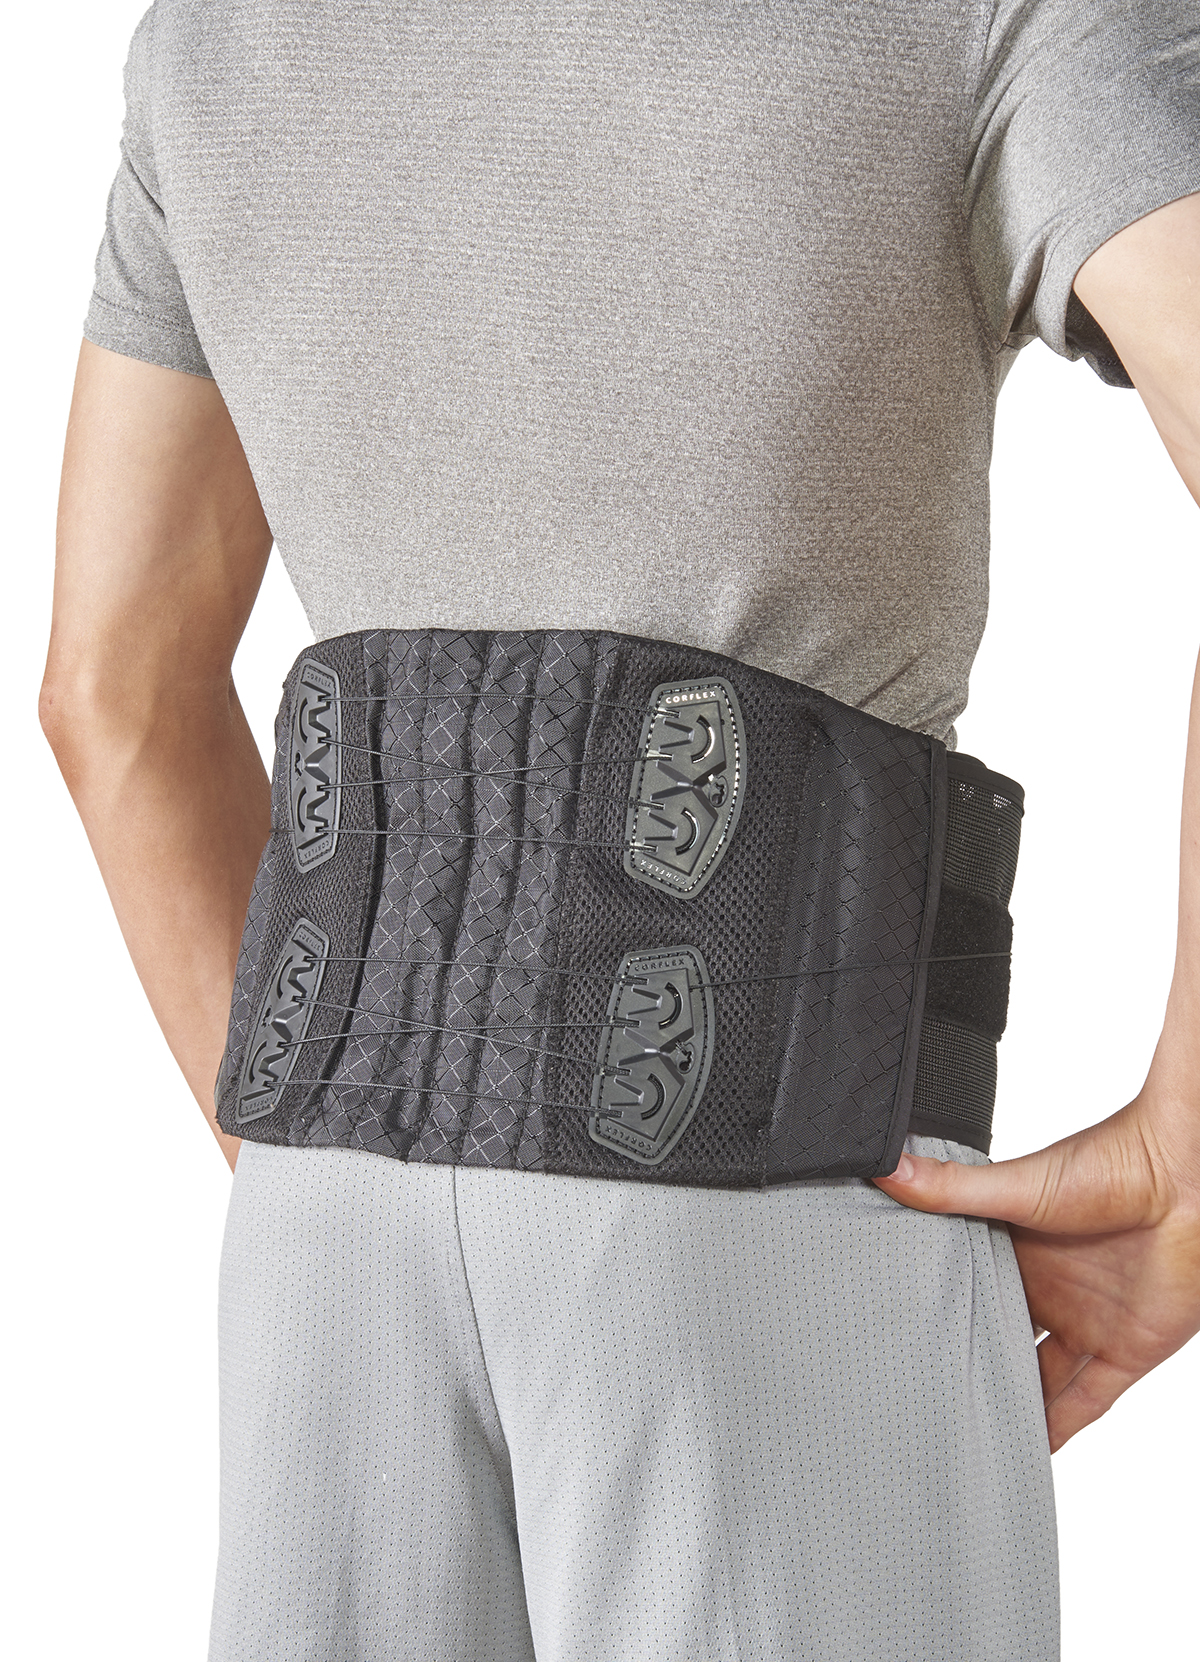 Corflex Criss-Cross Back Support Belt for Back Pain-M - White : :  Health & Personal Care